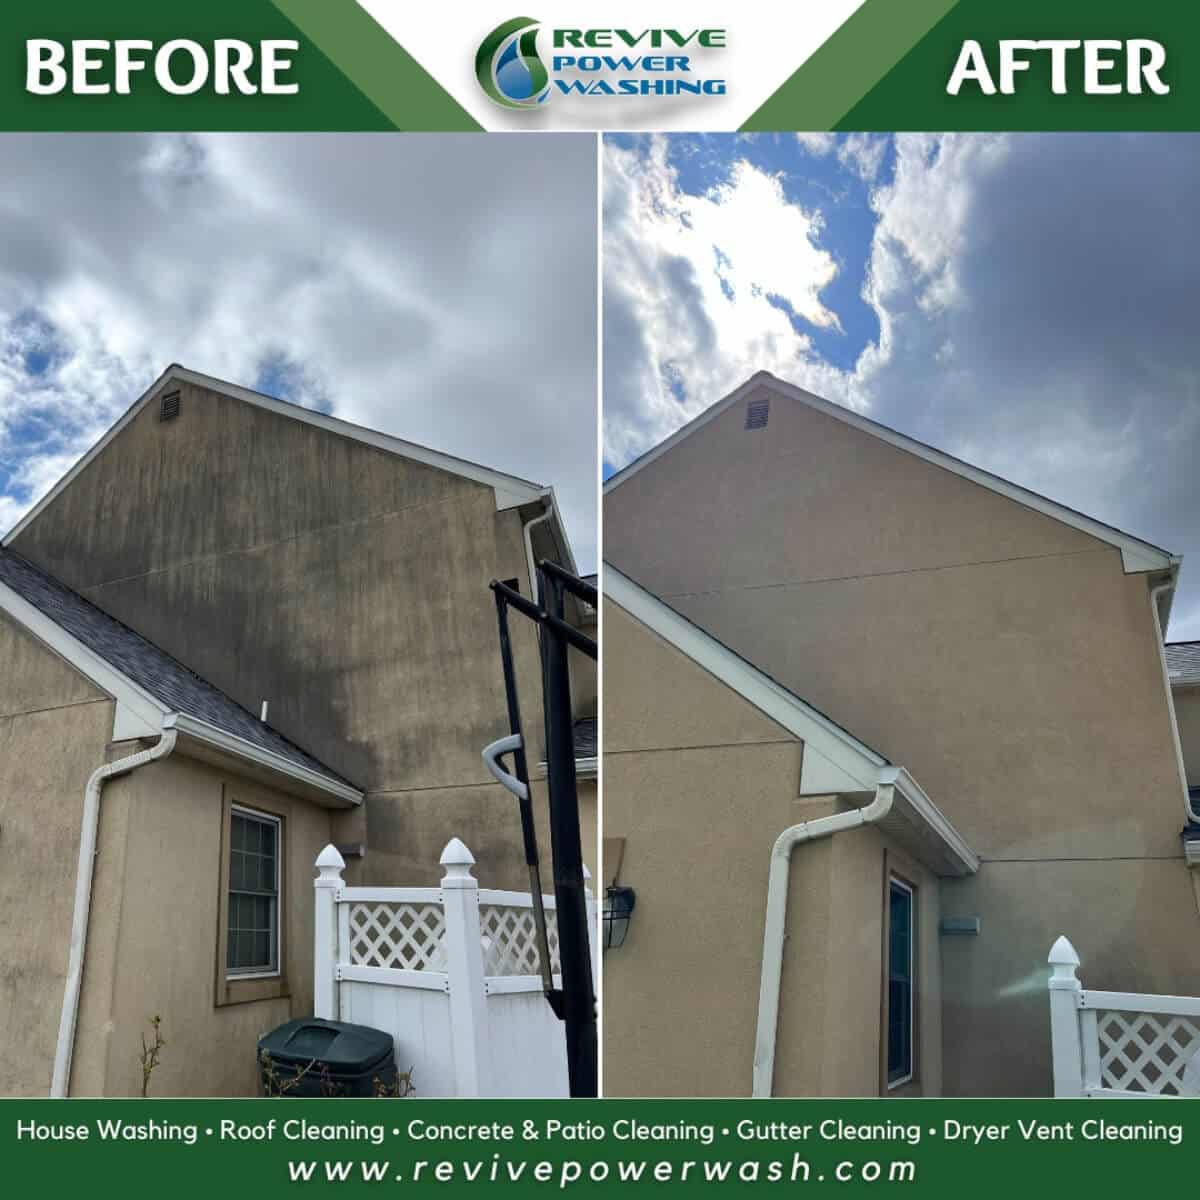 before and after comparison of house washing service in lansdale pa